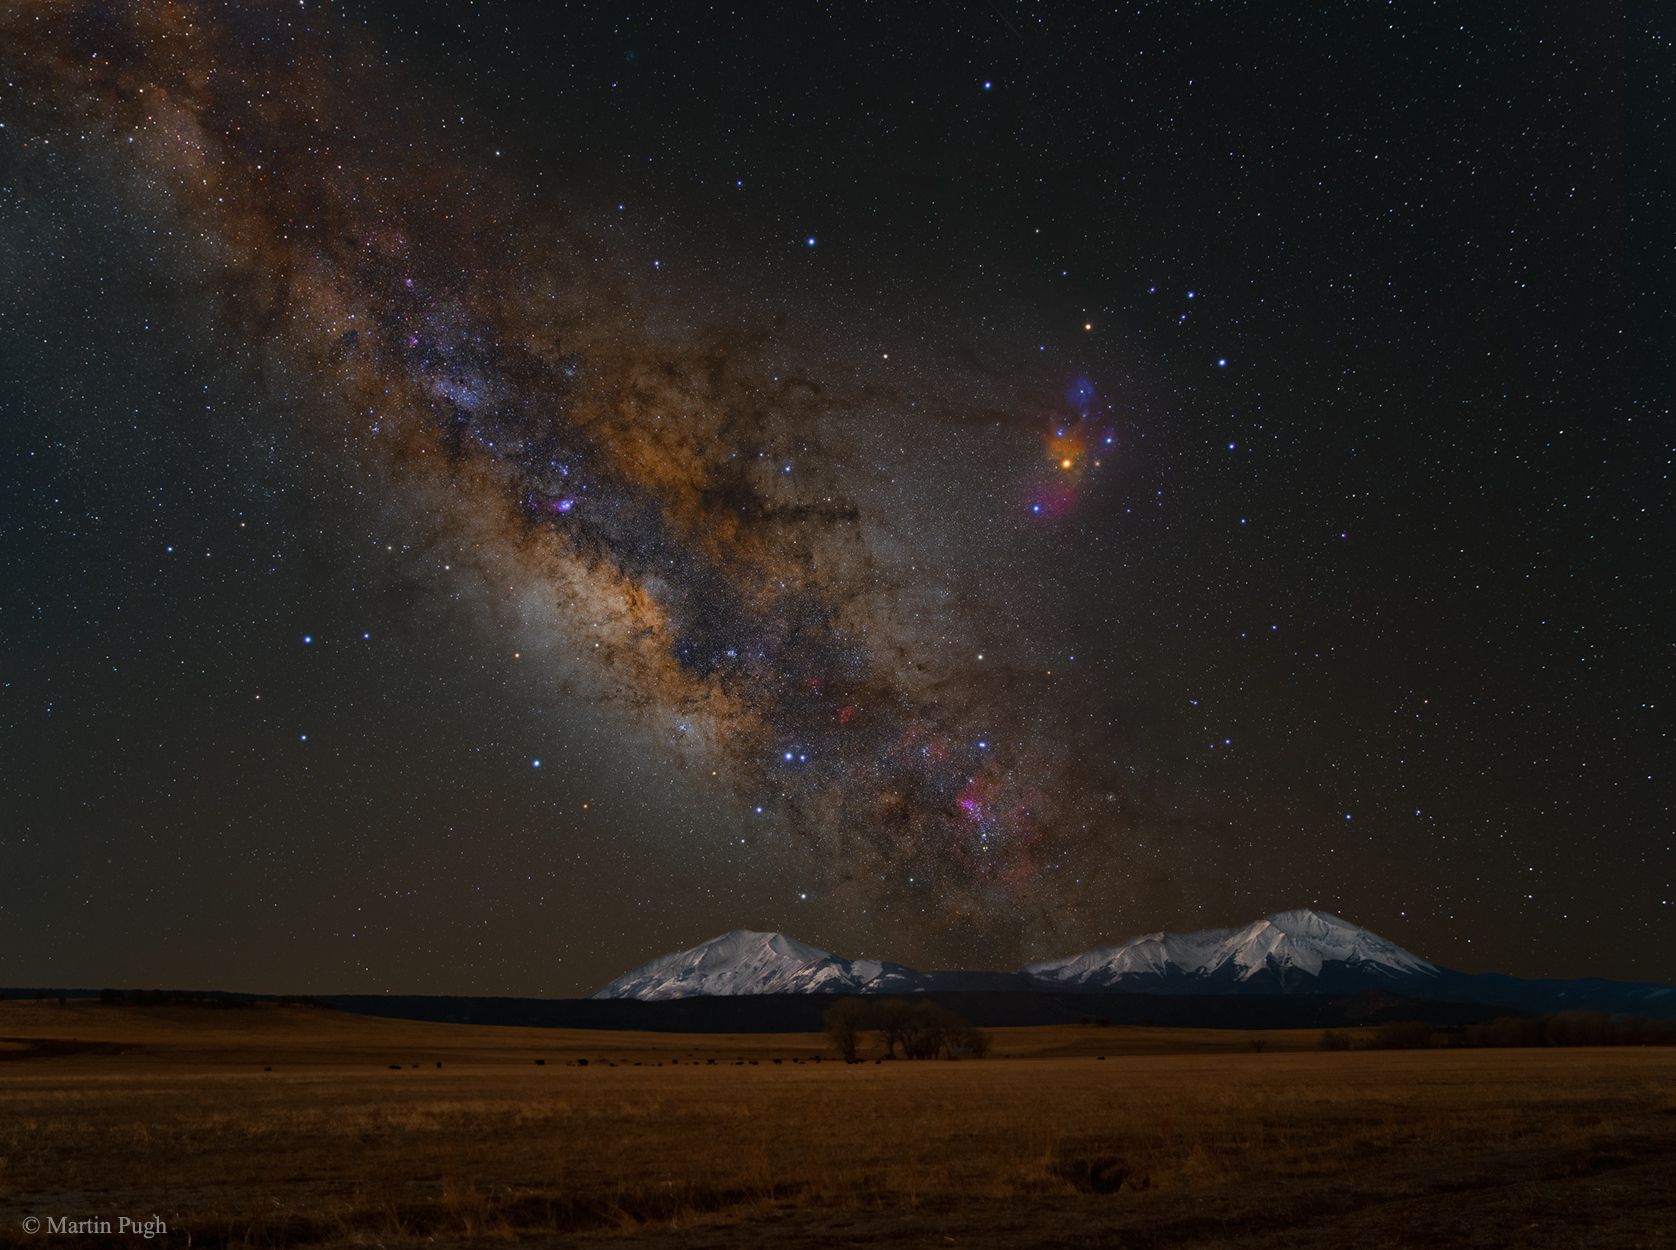 Milky Way over the Spanish Peaks in Colorado, United States